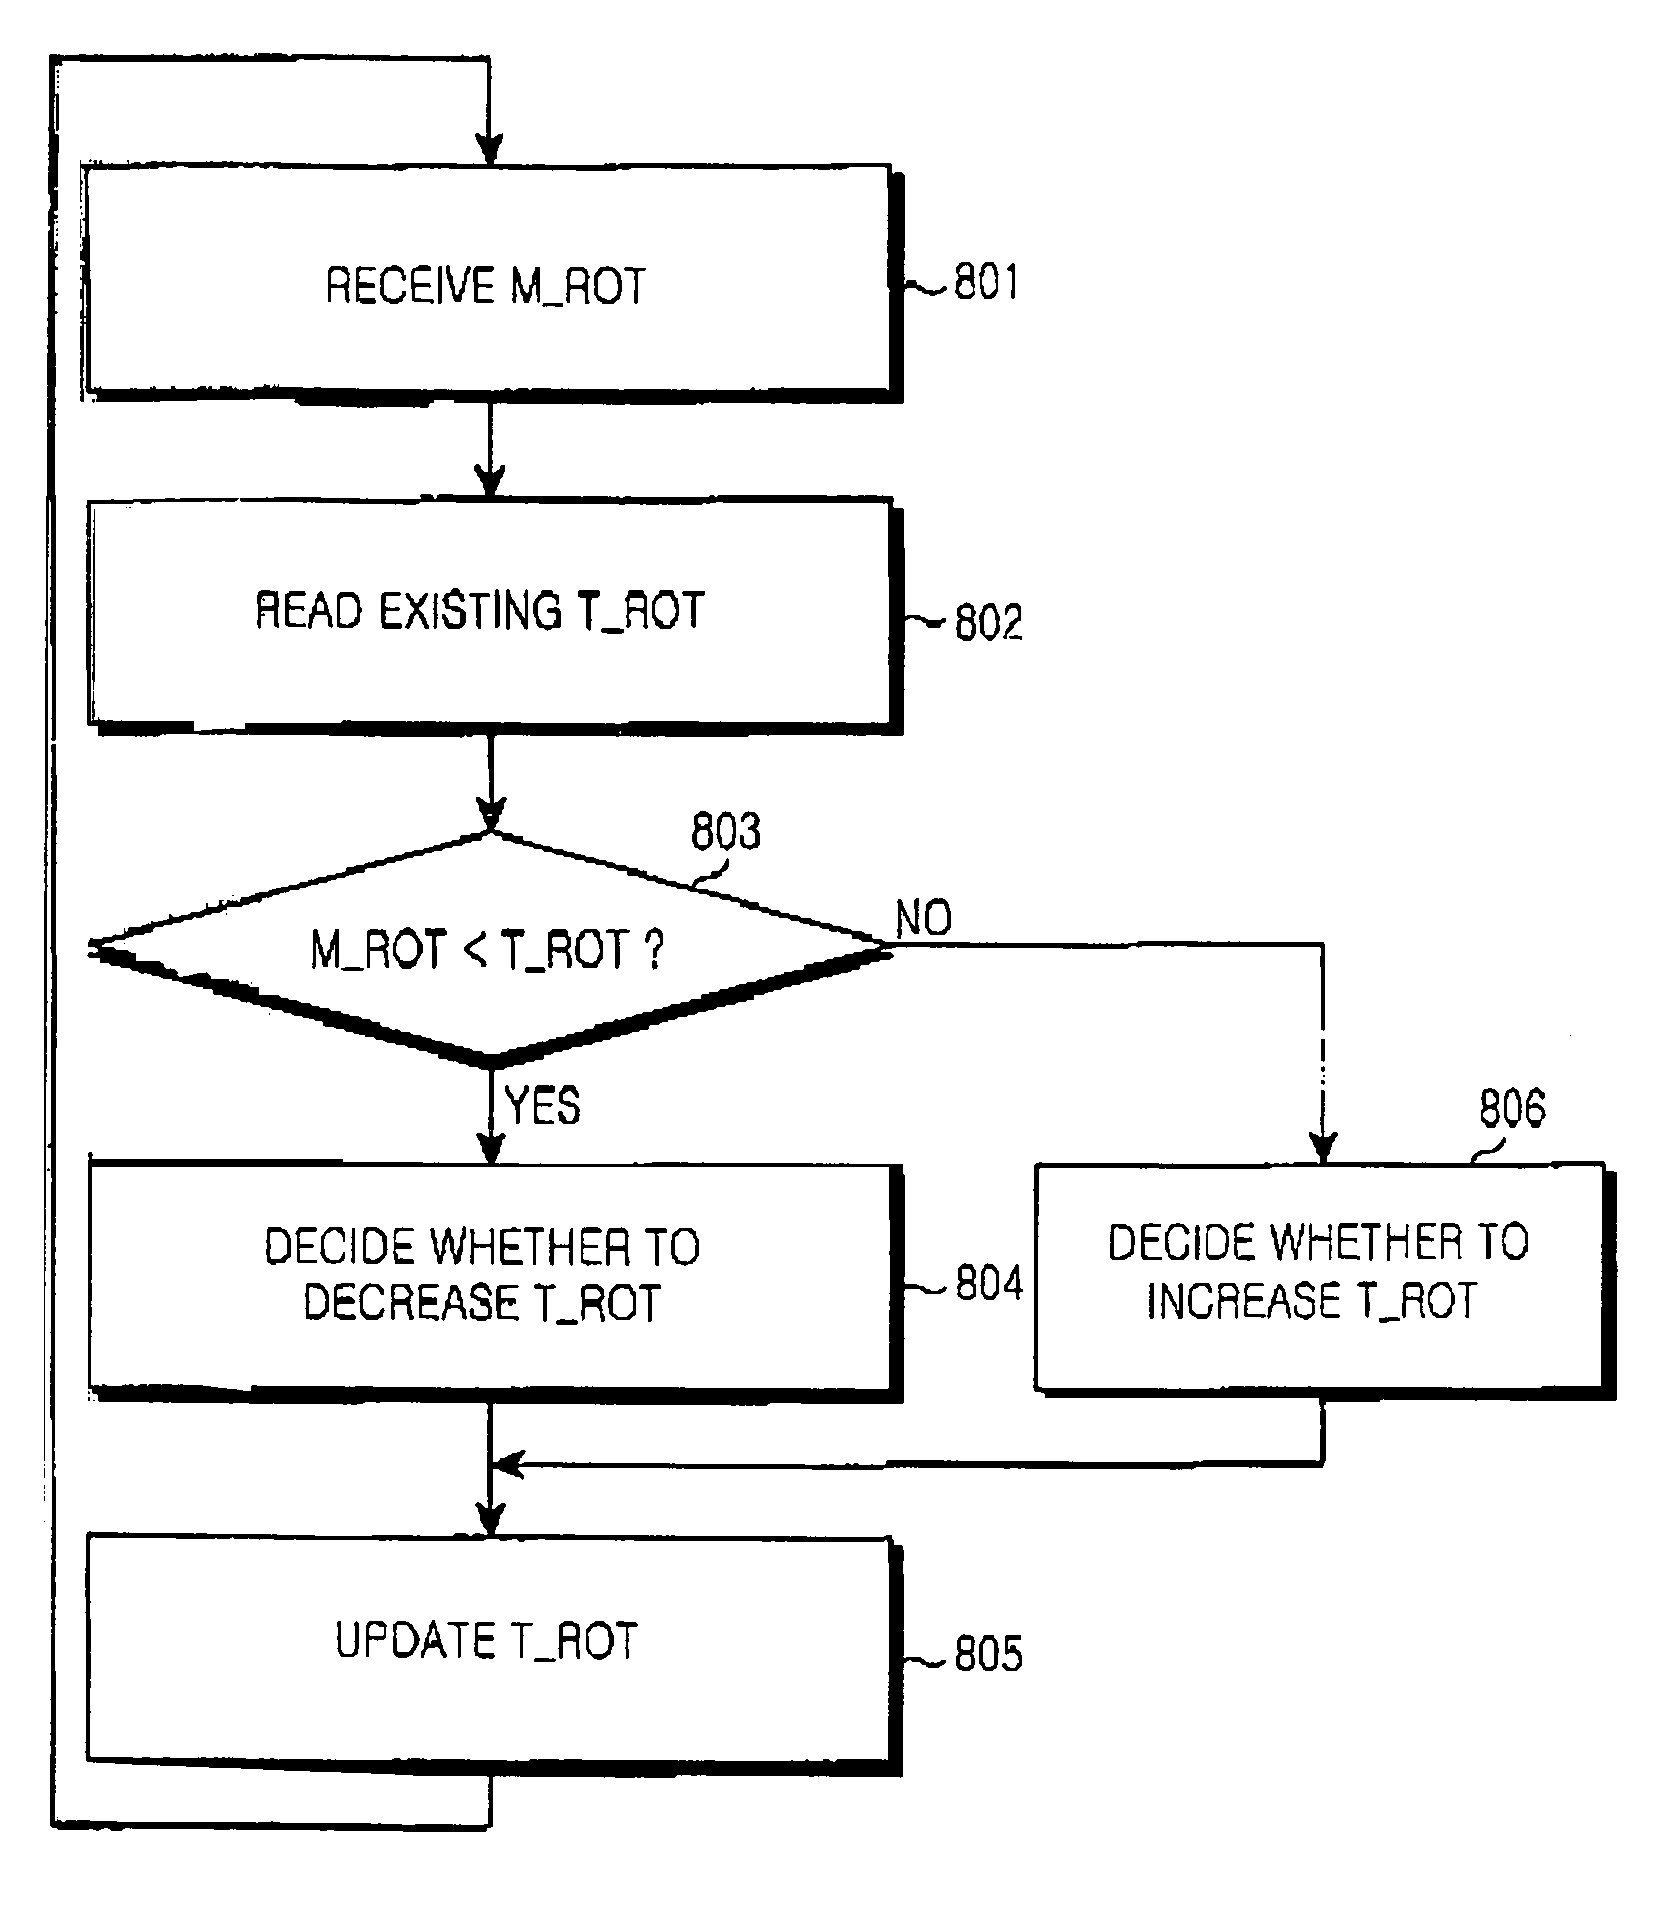 Scheduling apparatus and method for determining a desired noise rise over thermal noise in a CDMA mobile communication system